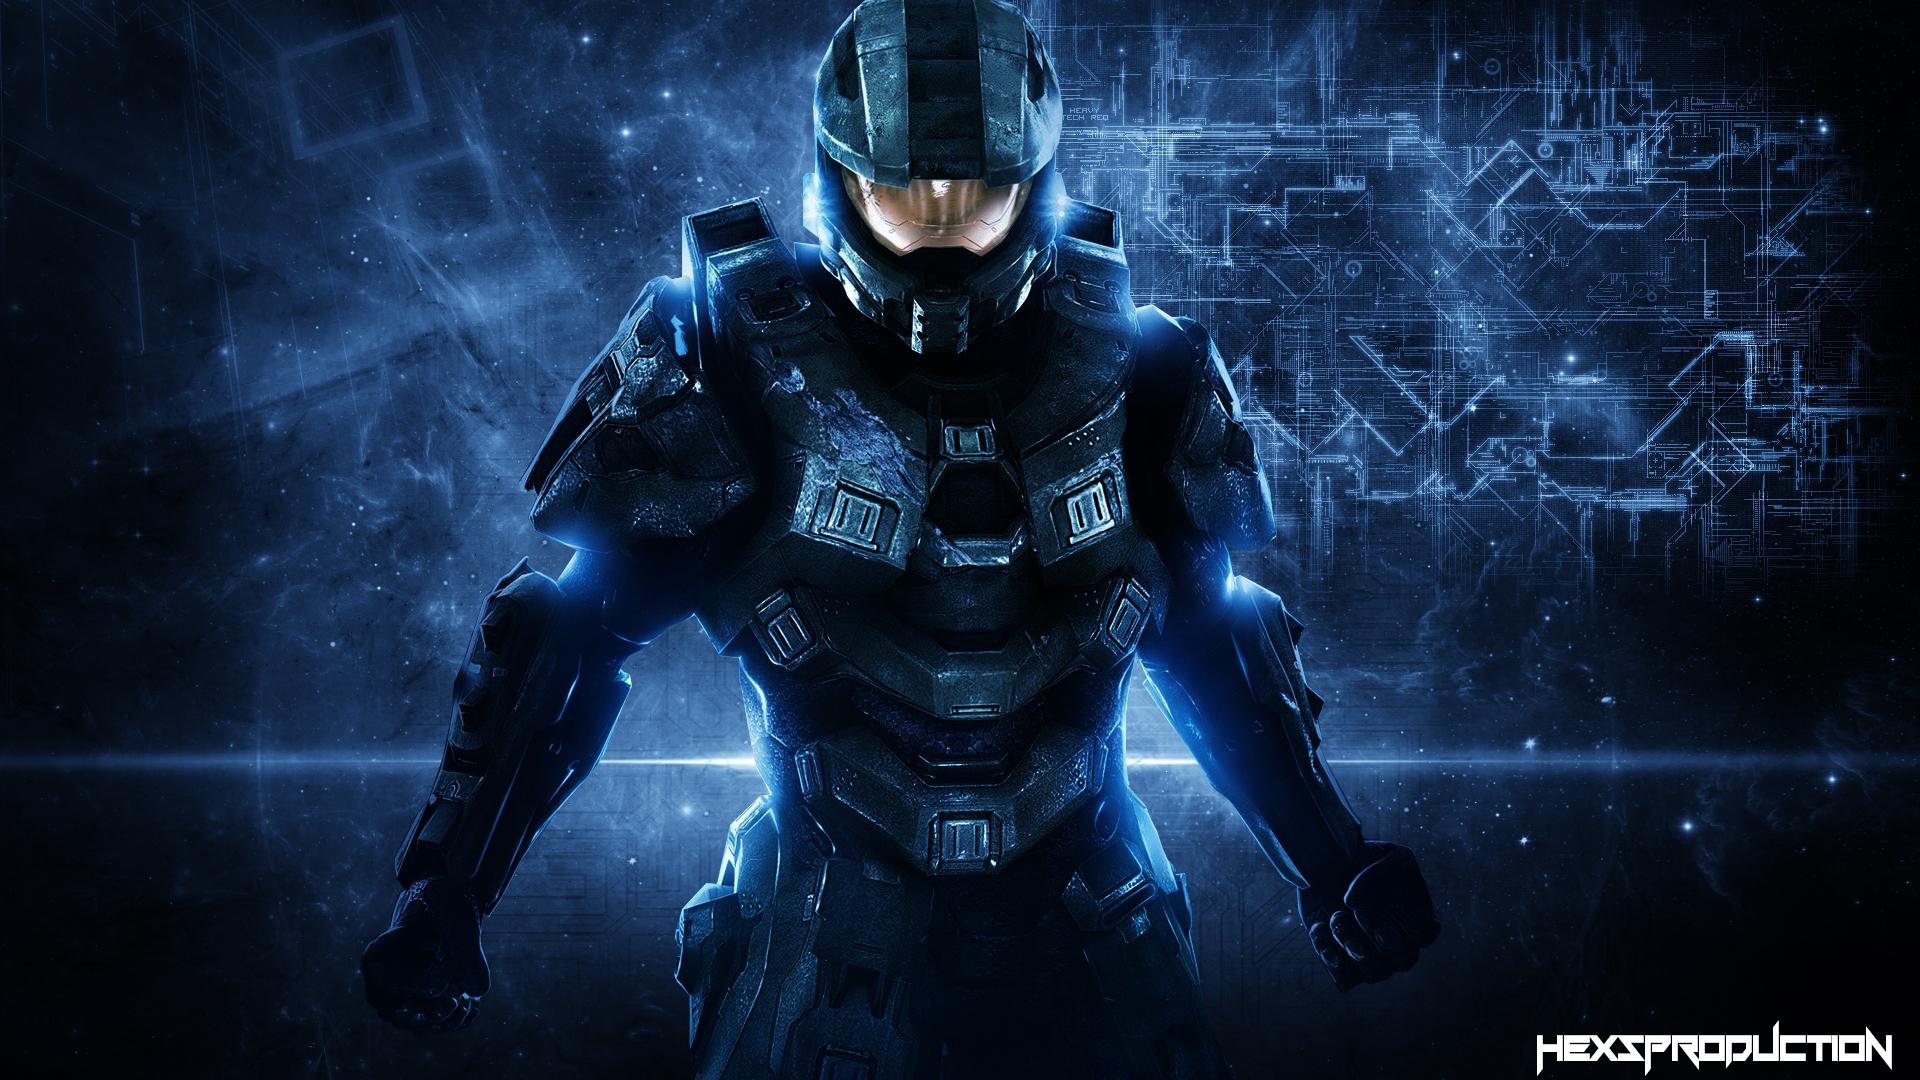 We Present Our Wallpaper For Desktop Of Halo In High Resolution And